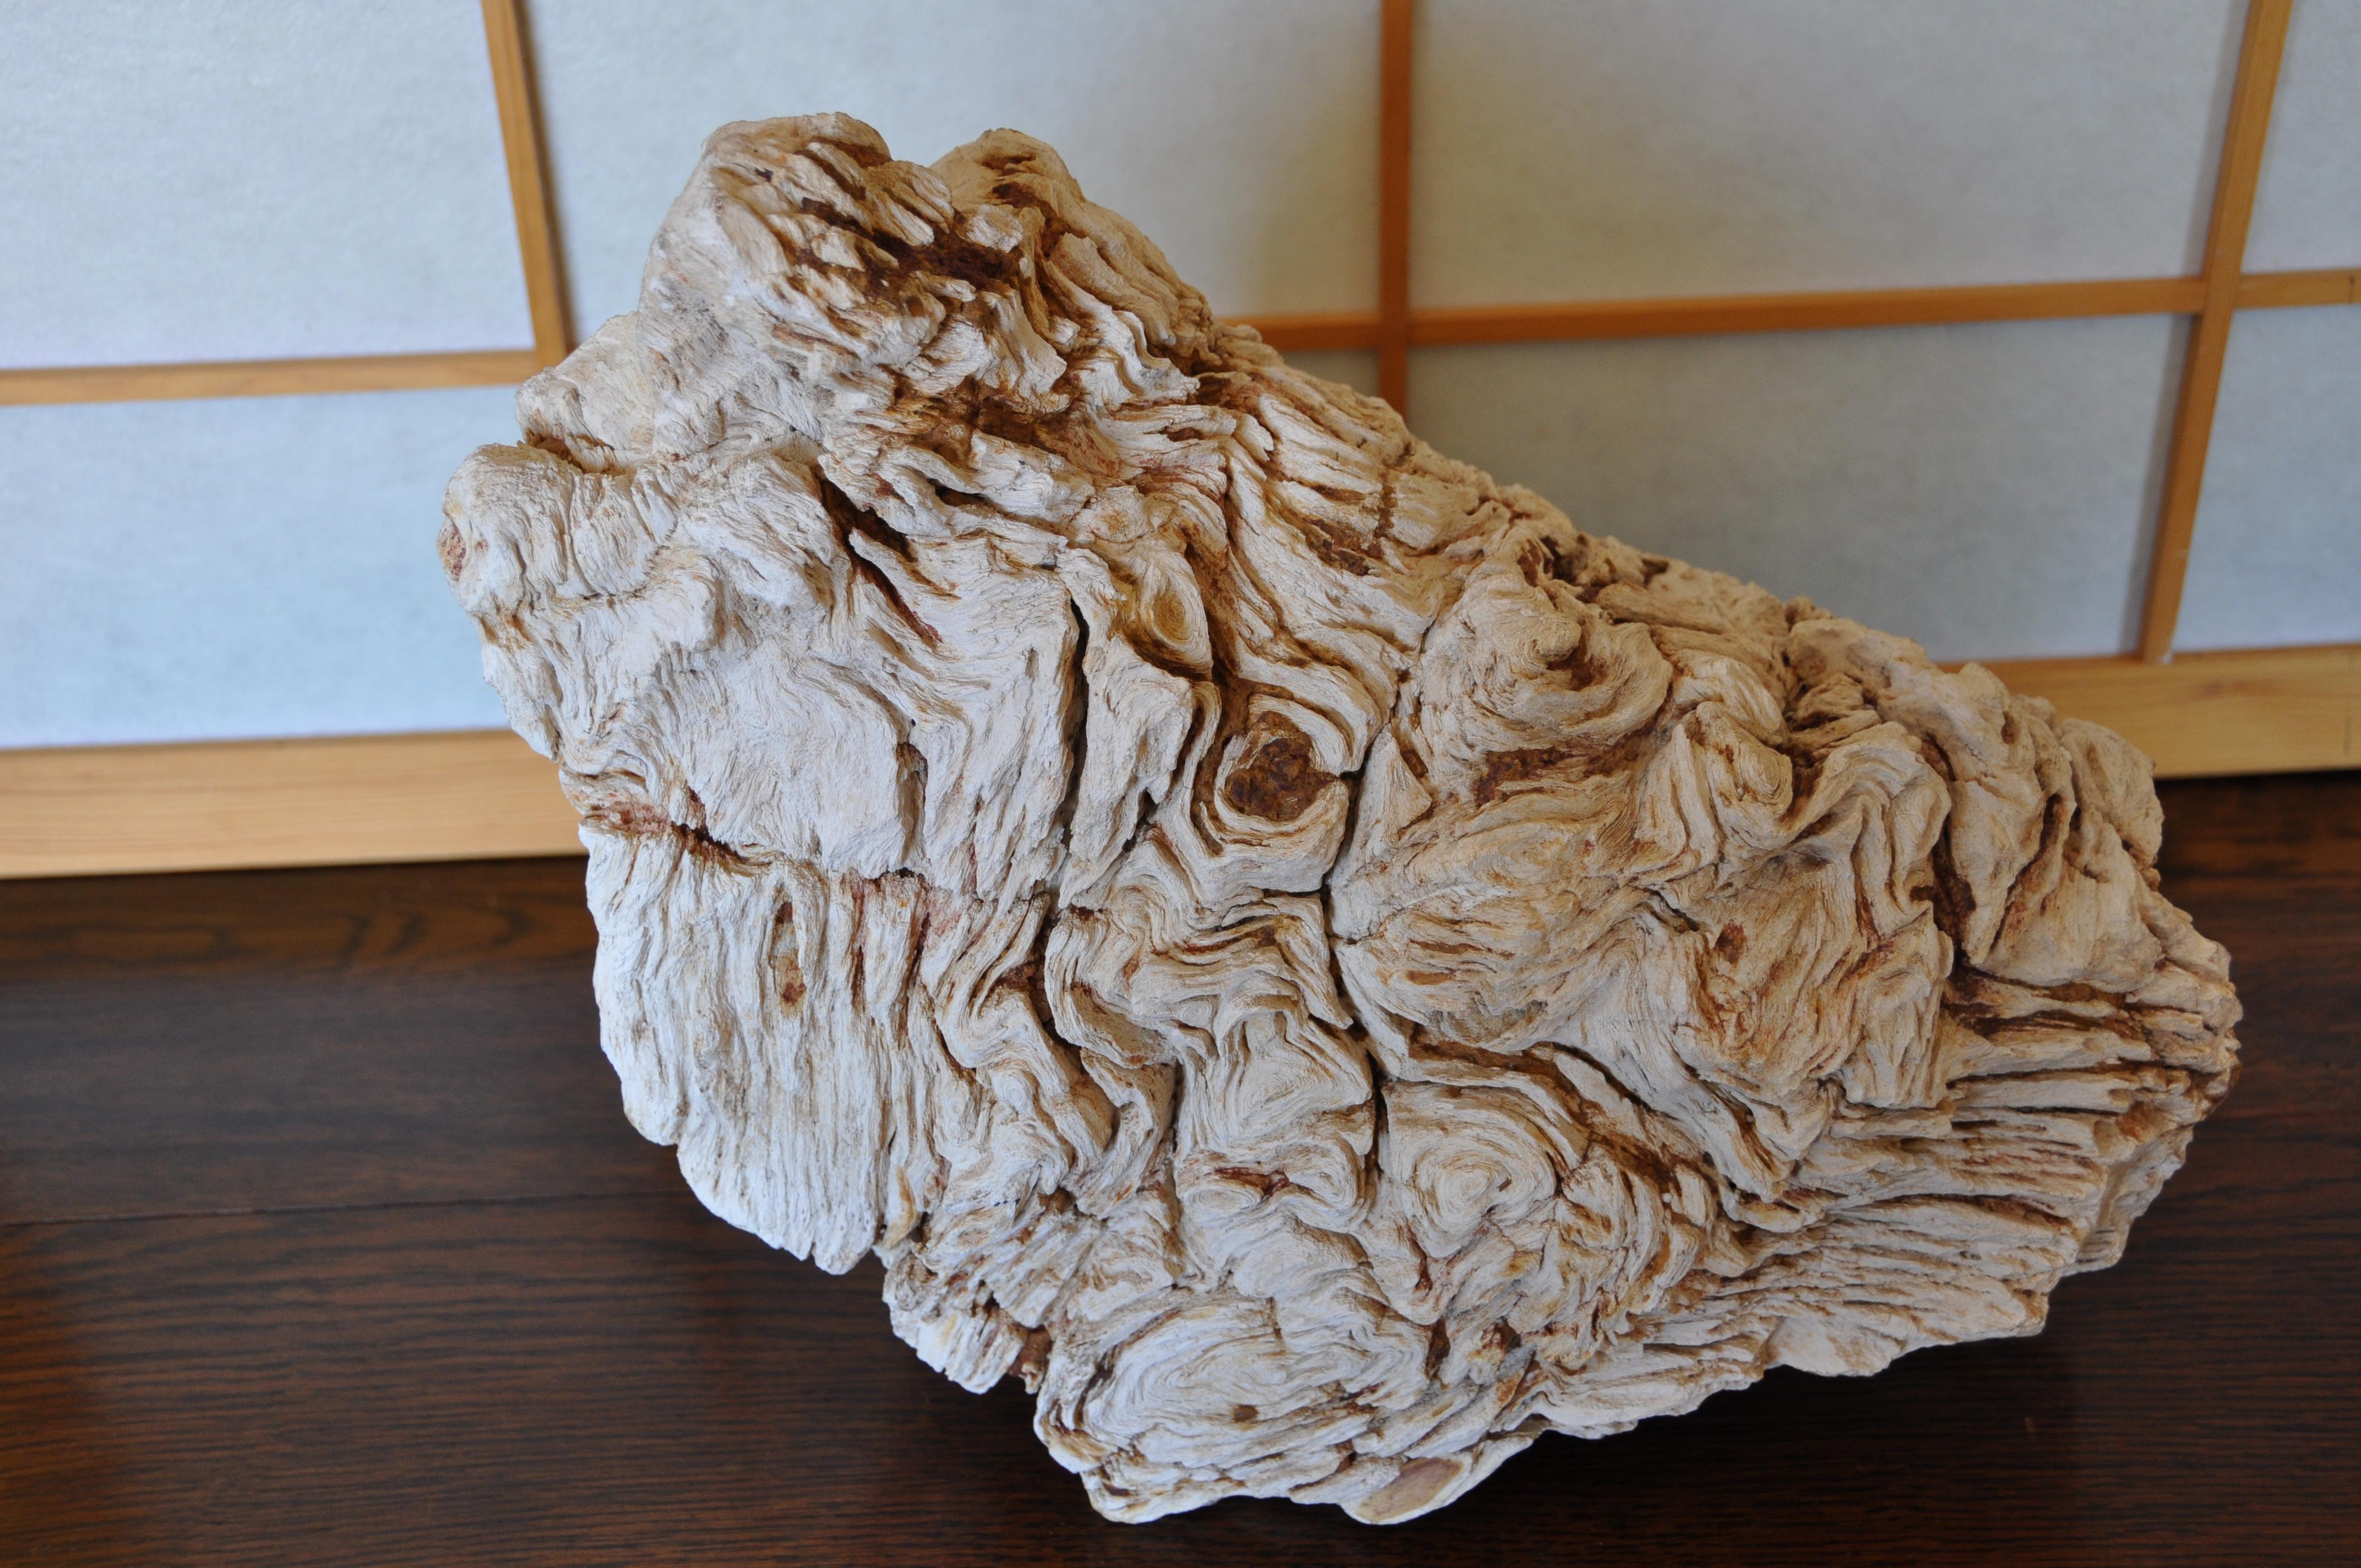 Rare ancient petrified root stock 

What makes this rare is its immense size.

This is an absolutely stunning Museum Quality specimen for the serious collector.

The root stock from an ancient tree has petrified into stone over millions of